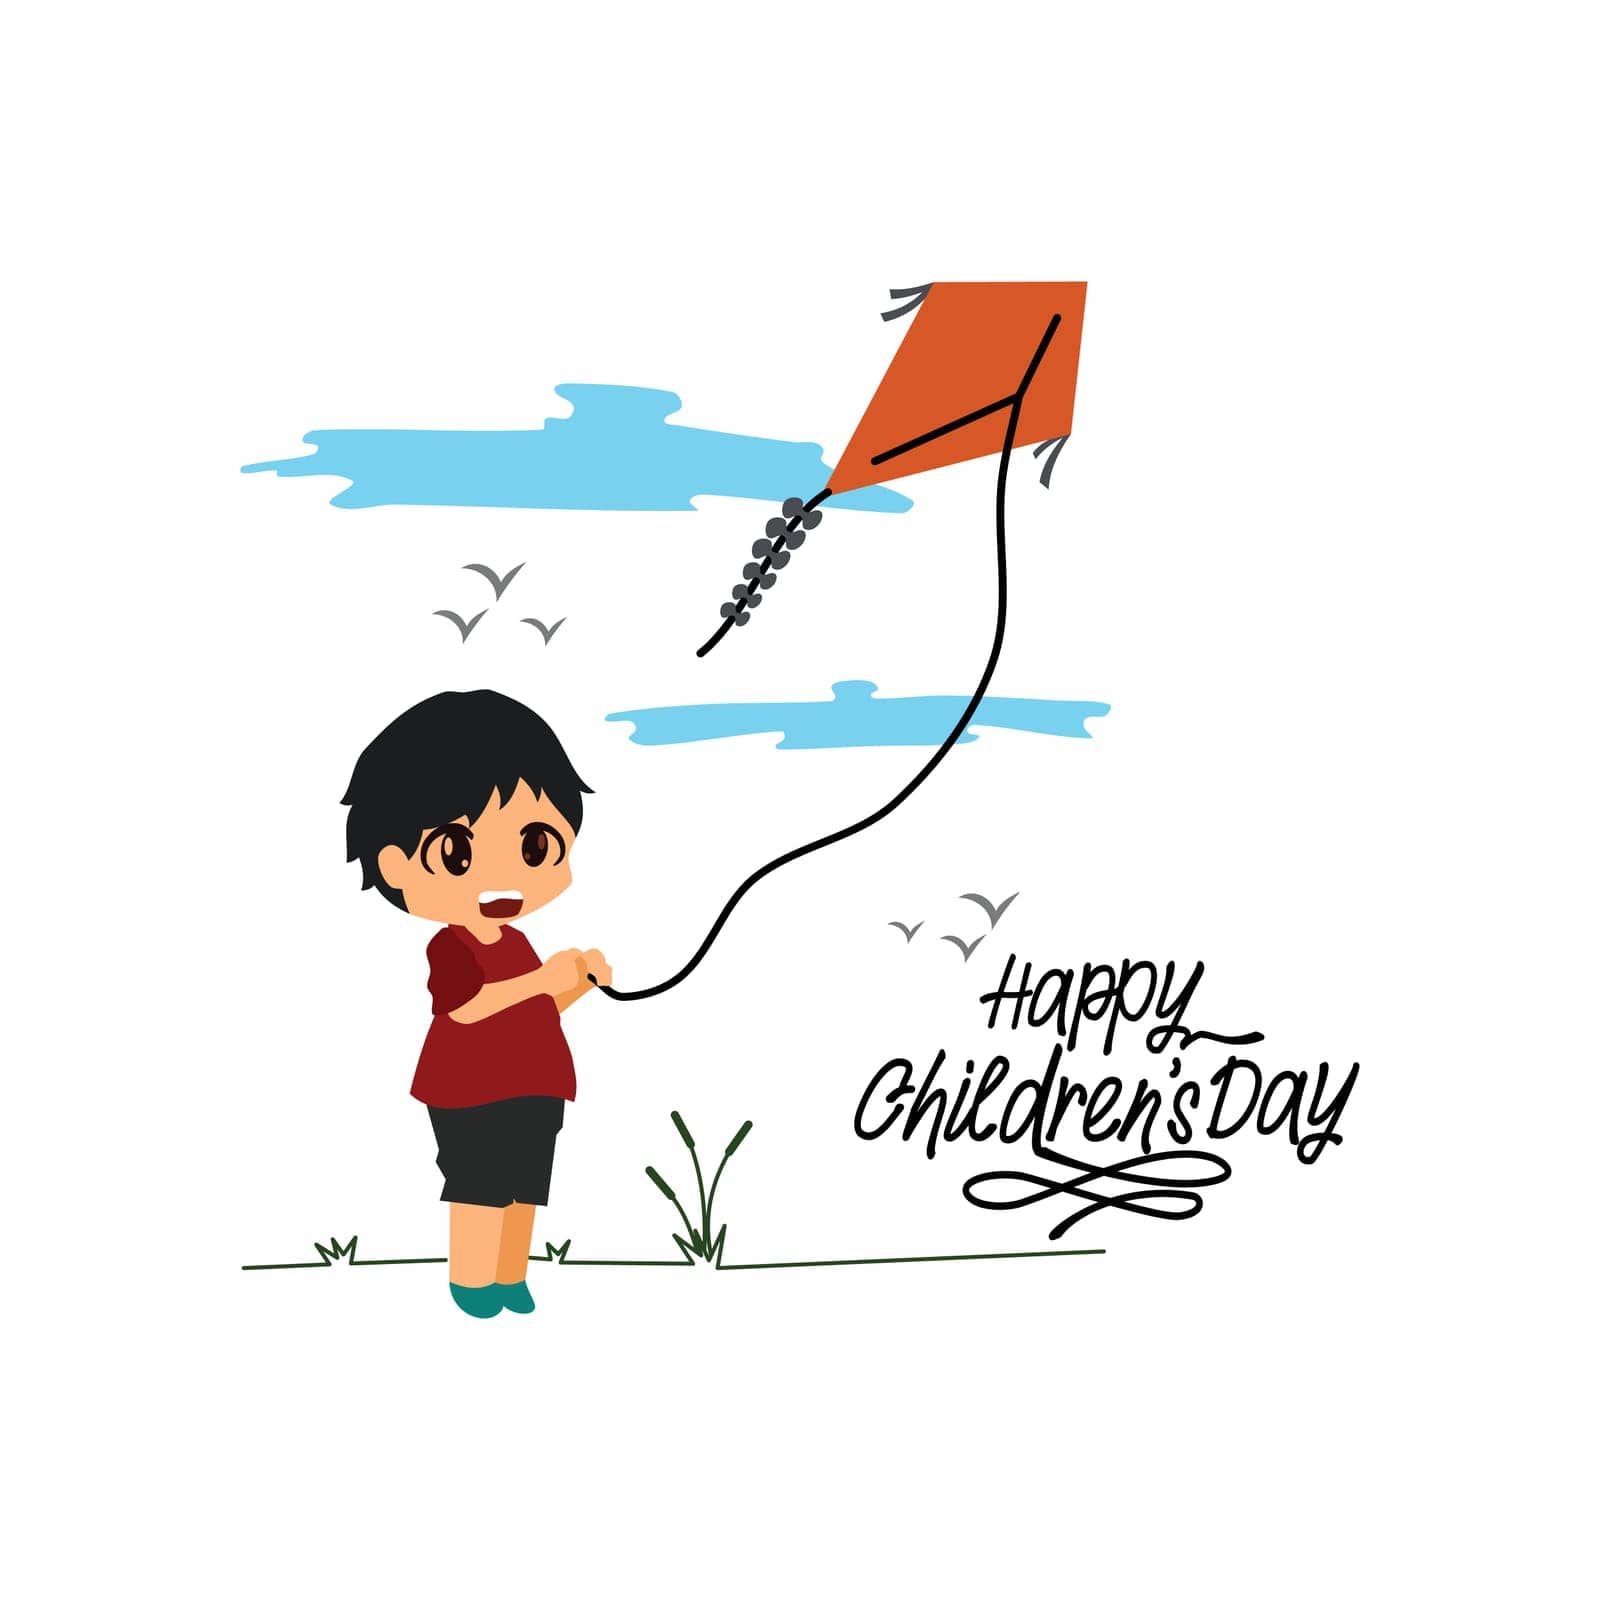 Kid playing with kites Illustration. Happy Children's Day